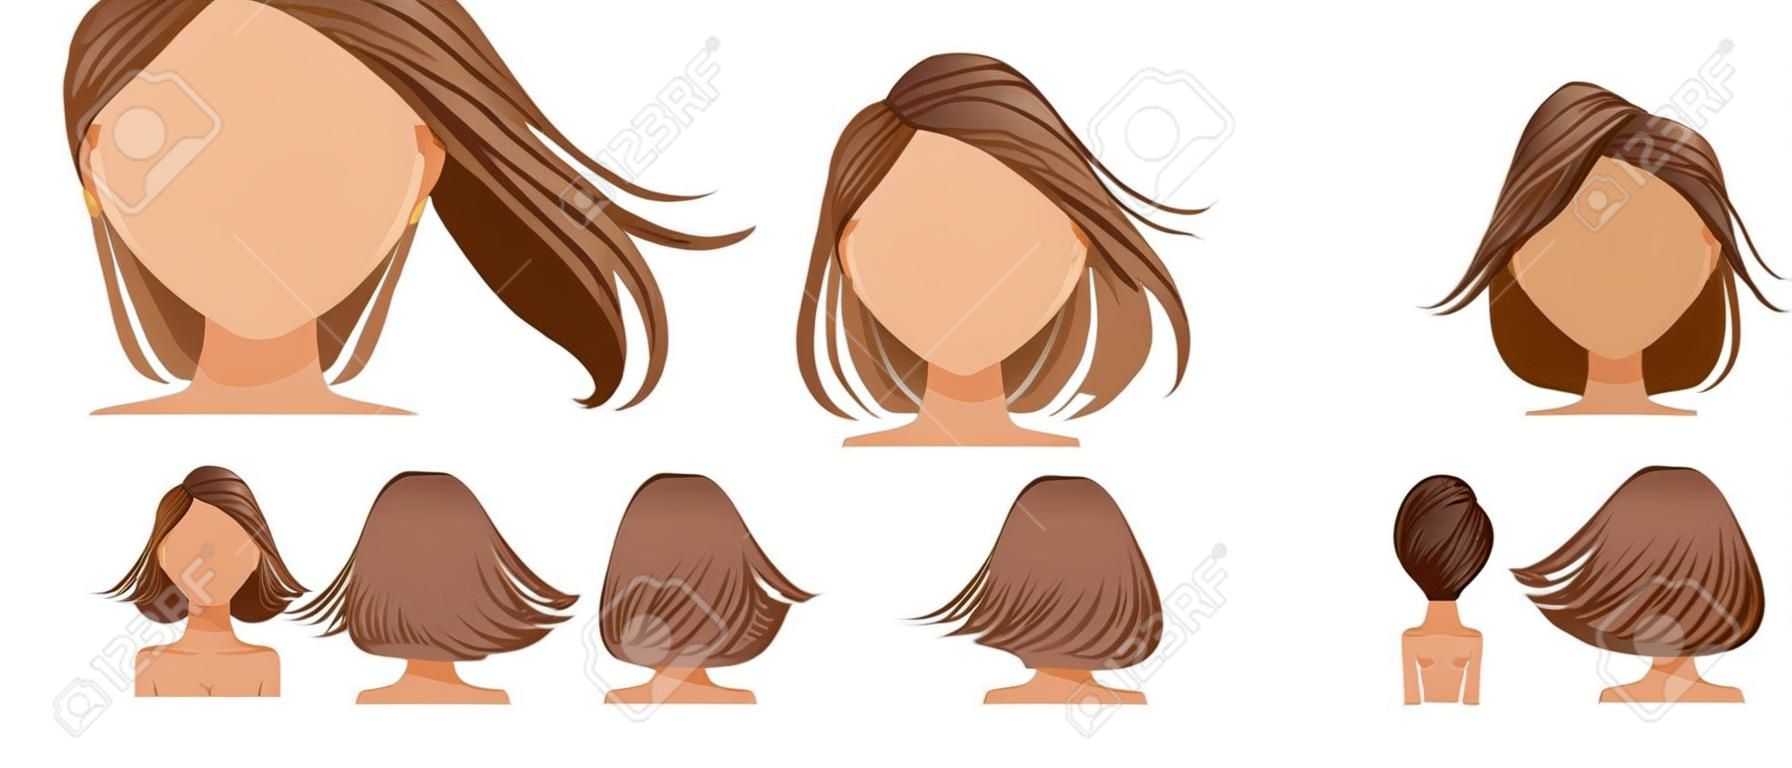 hair blown women set. Wide view The hair is blown away. Front, rear, left, right. Beautiful hairstyle brown short hair of female.  trendy haircut. vector icon set isolated on white background.